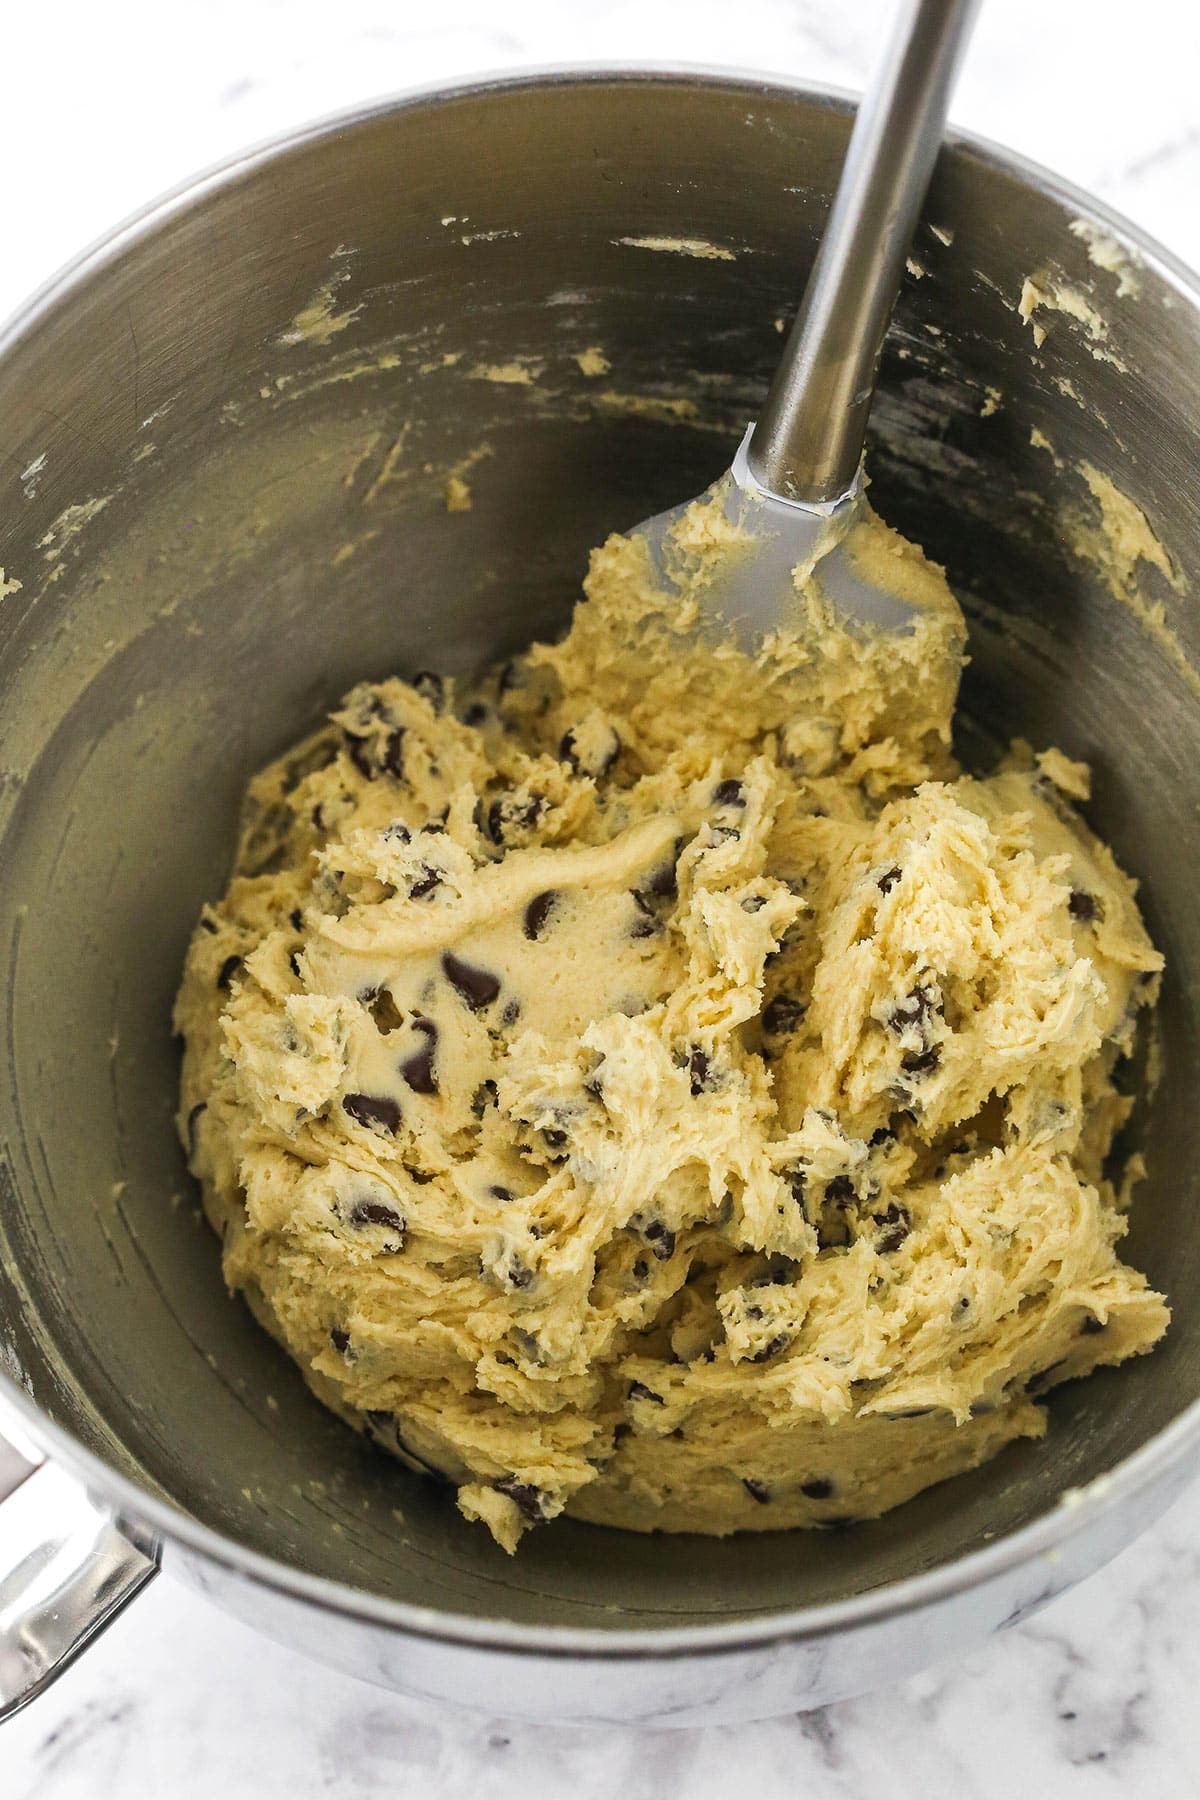 Completed chocolate chip cookie dough in a big metal bowl with a rubber spatula